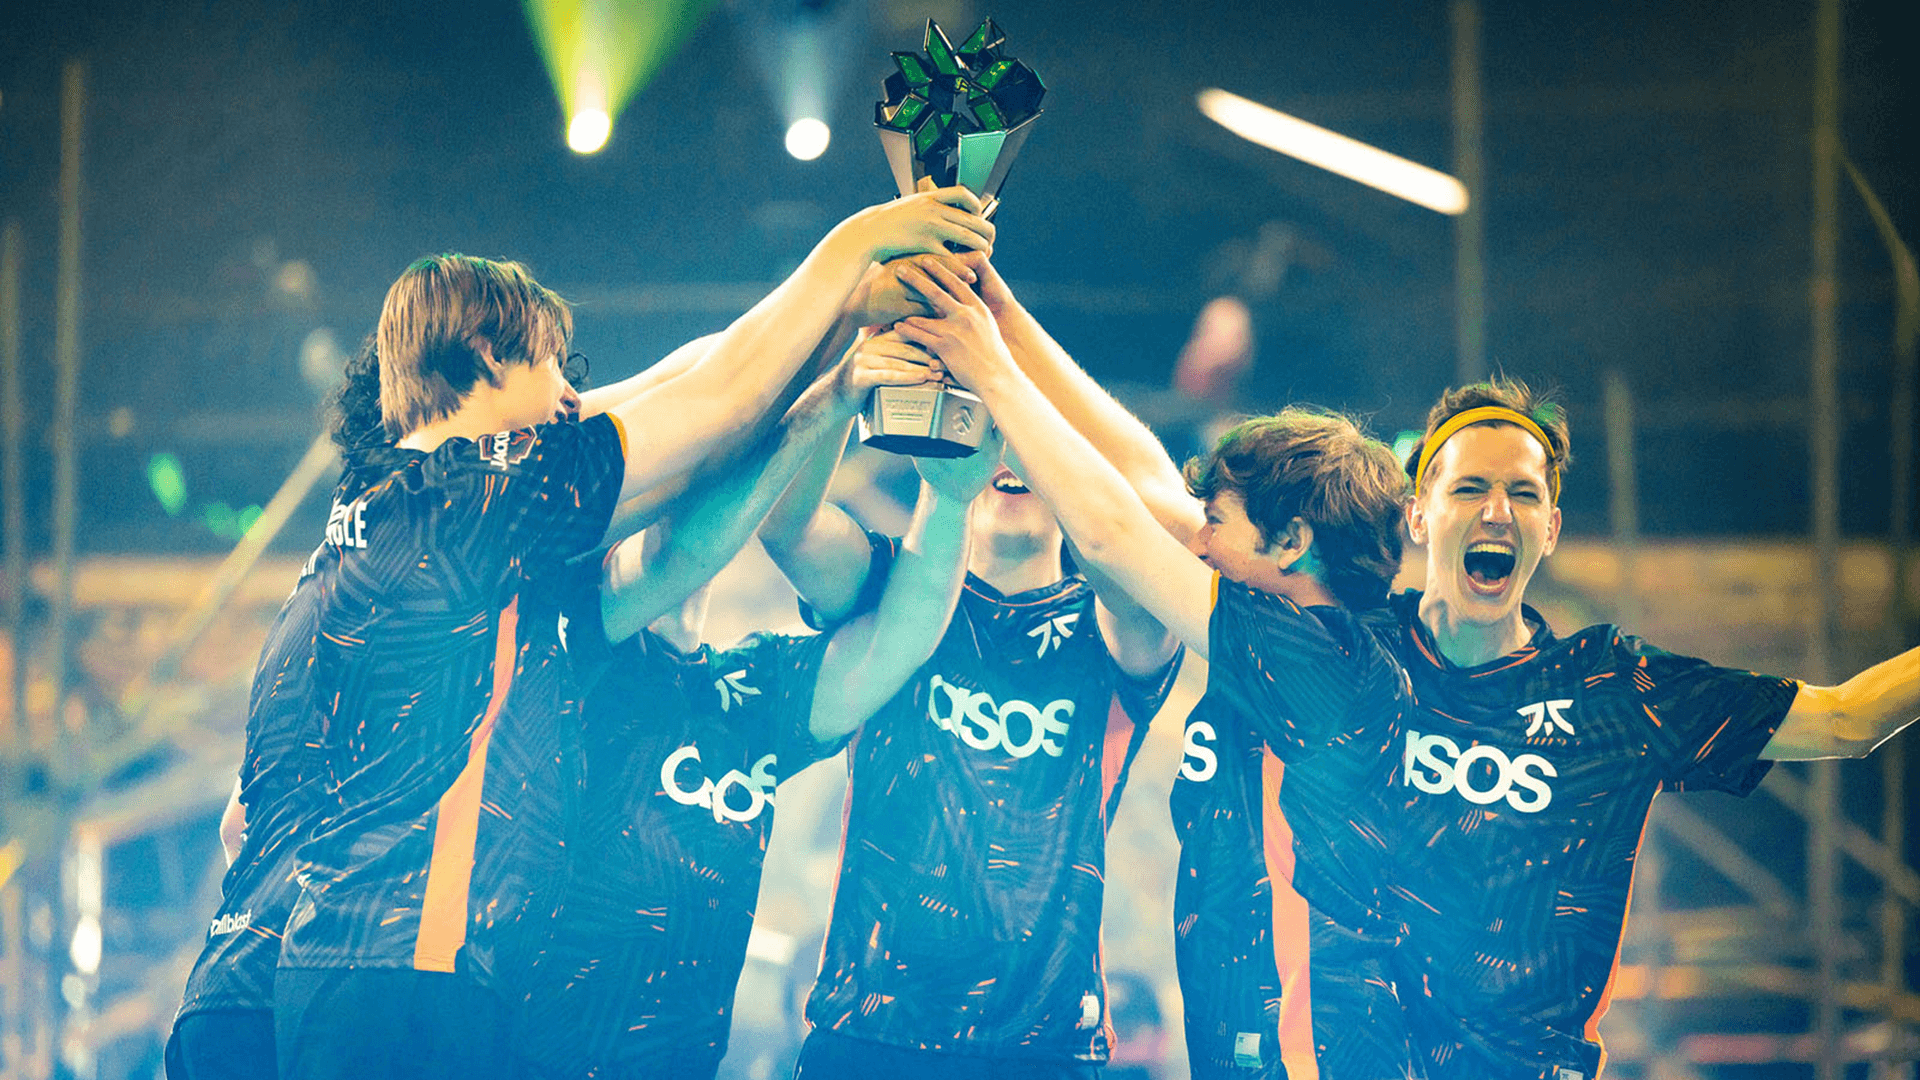 Valorant: Fnatic wins the trophy in epic VCT Lock/in final